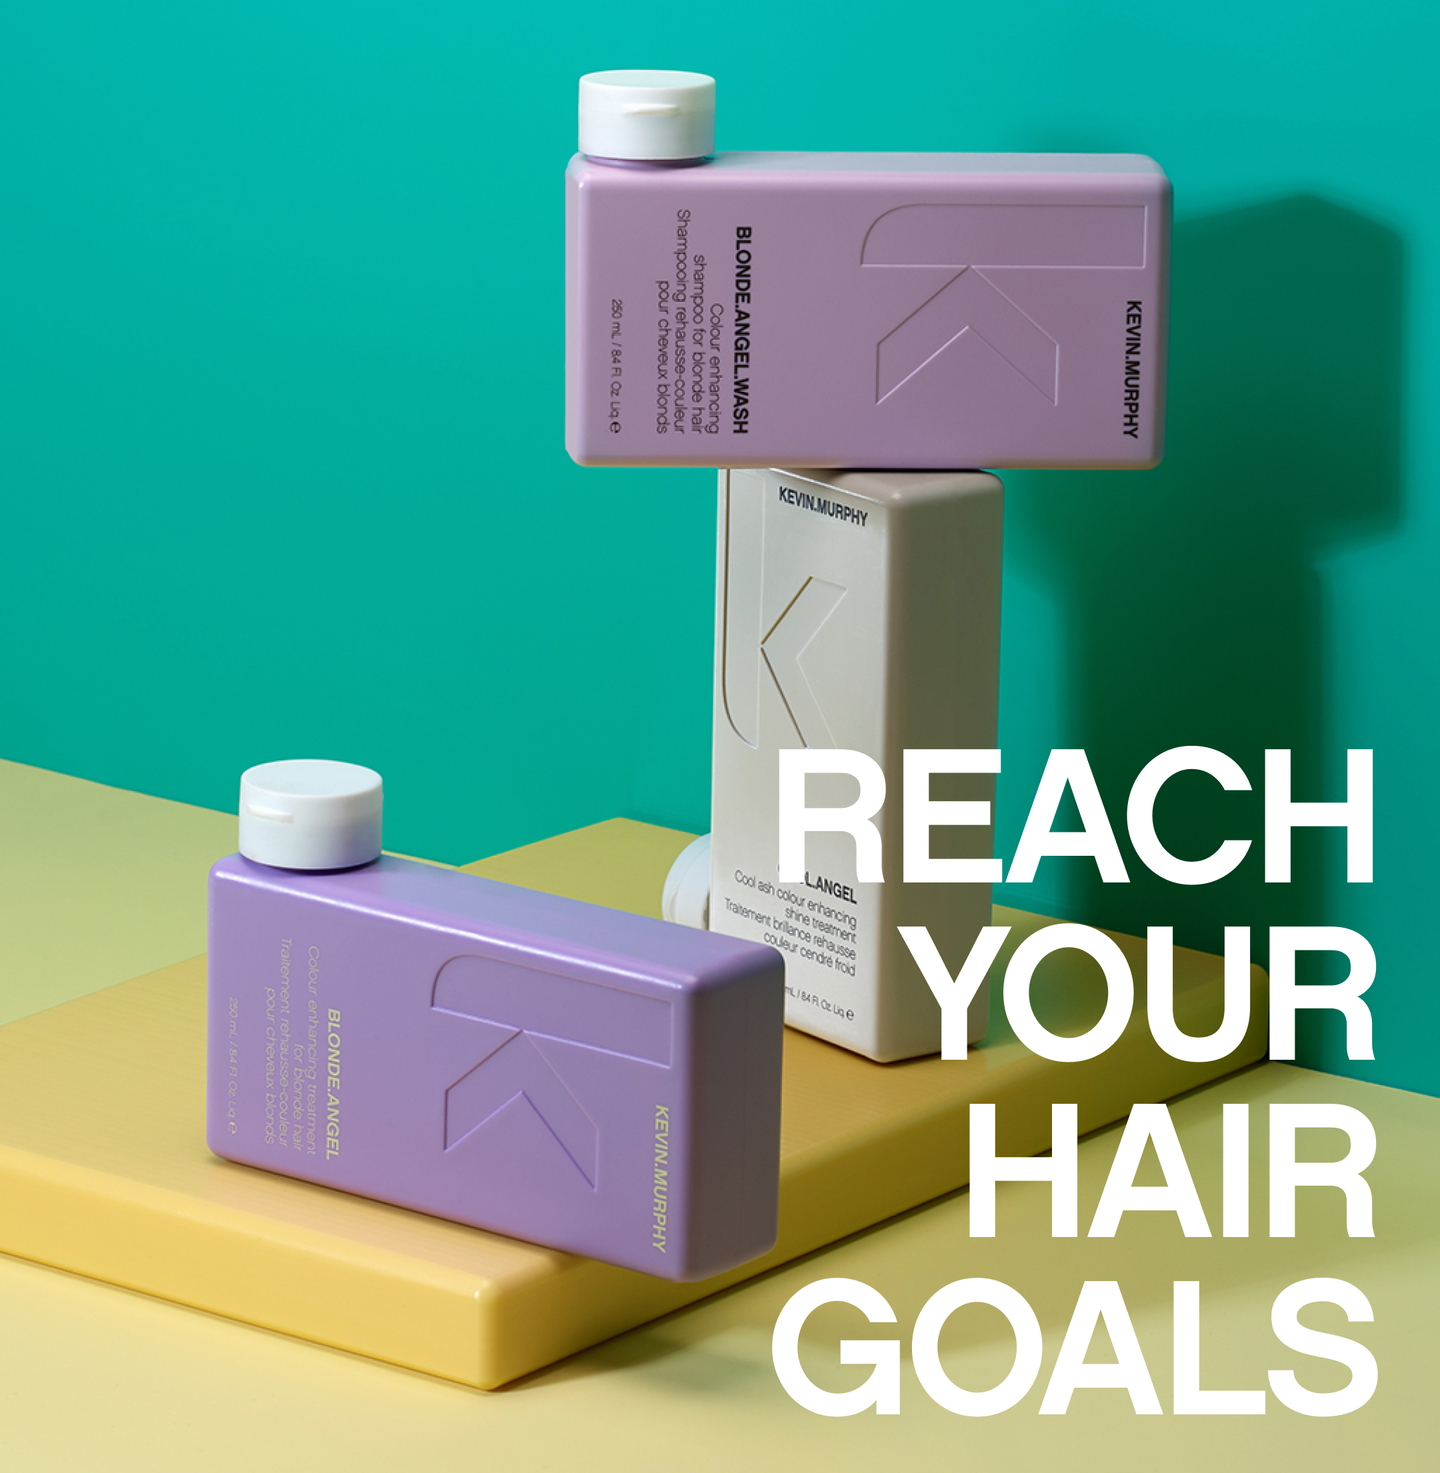 Meet the newest KEVIN.MURPHY BLOW.DRY hair care, beloved by professionals